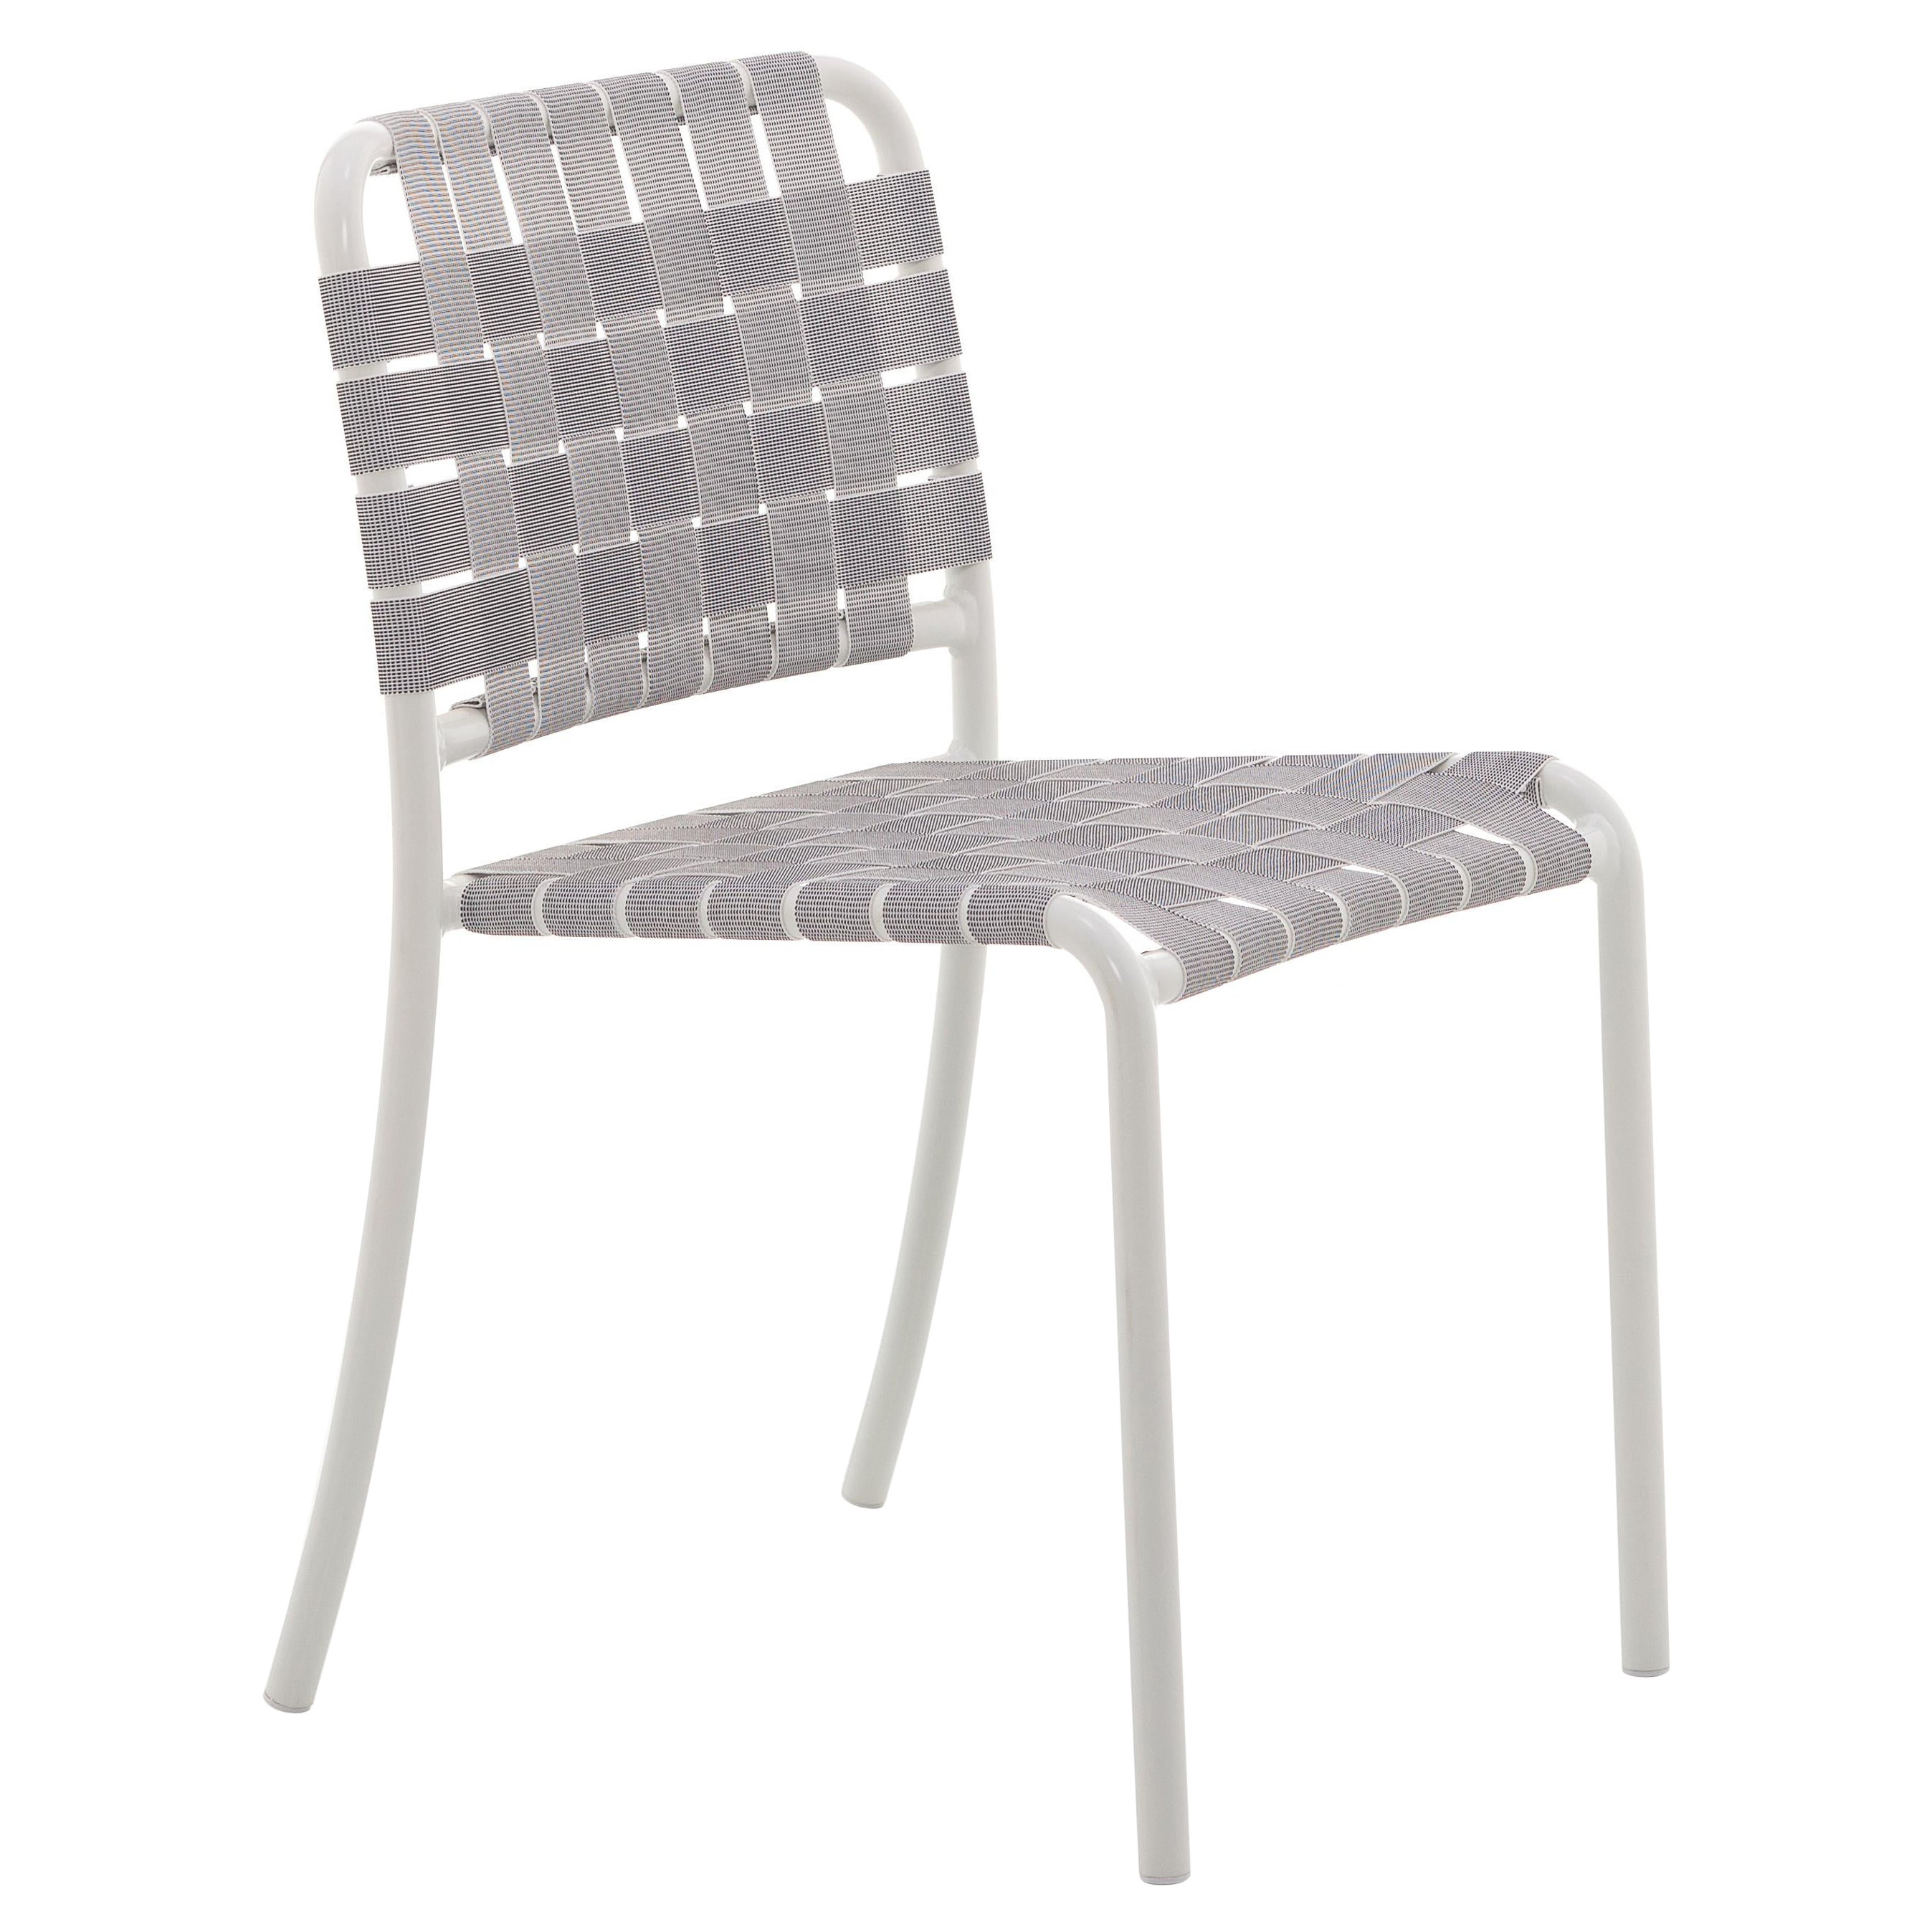 Gervasoni Inout Chair in Woven with Grey Elastic Belts and White Aluminium Frame For Sale